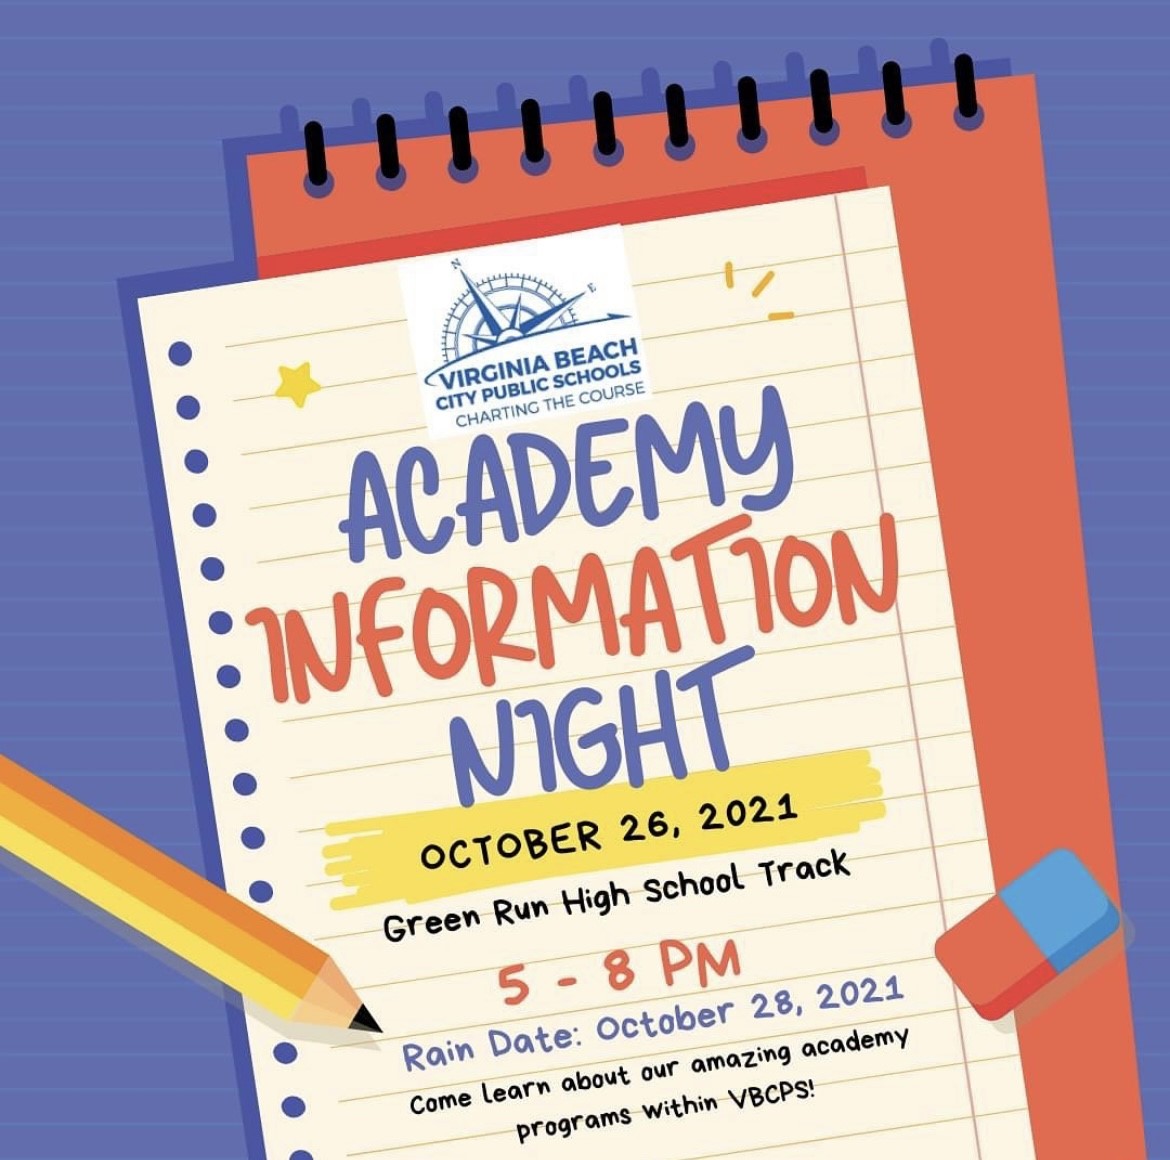 Please Save the Date and come hear about the amazing Academy programs that VBCPS offers on October 26th at 5:00. #EBAProud